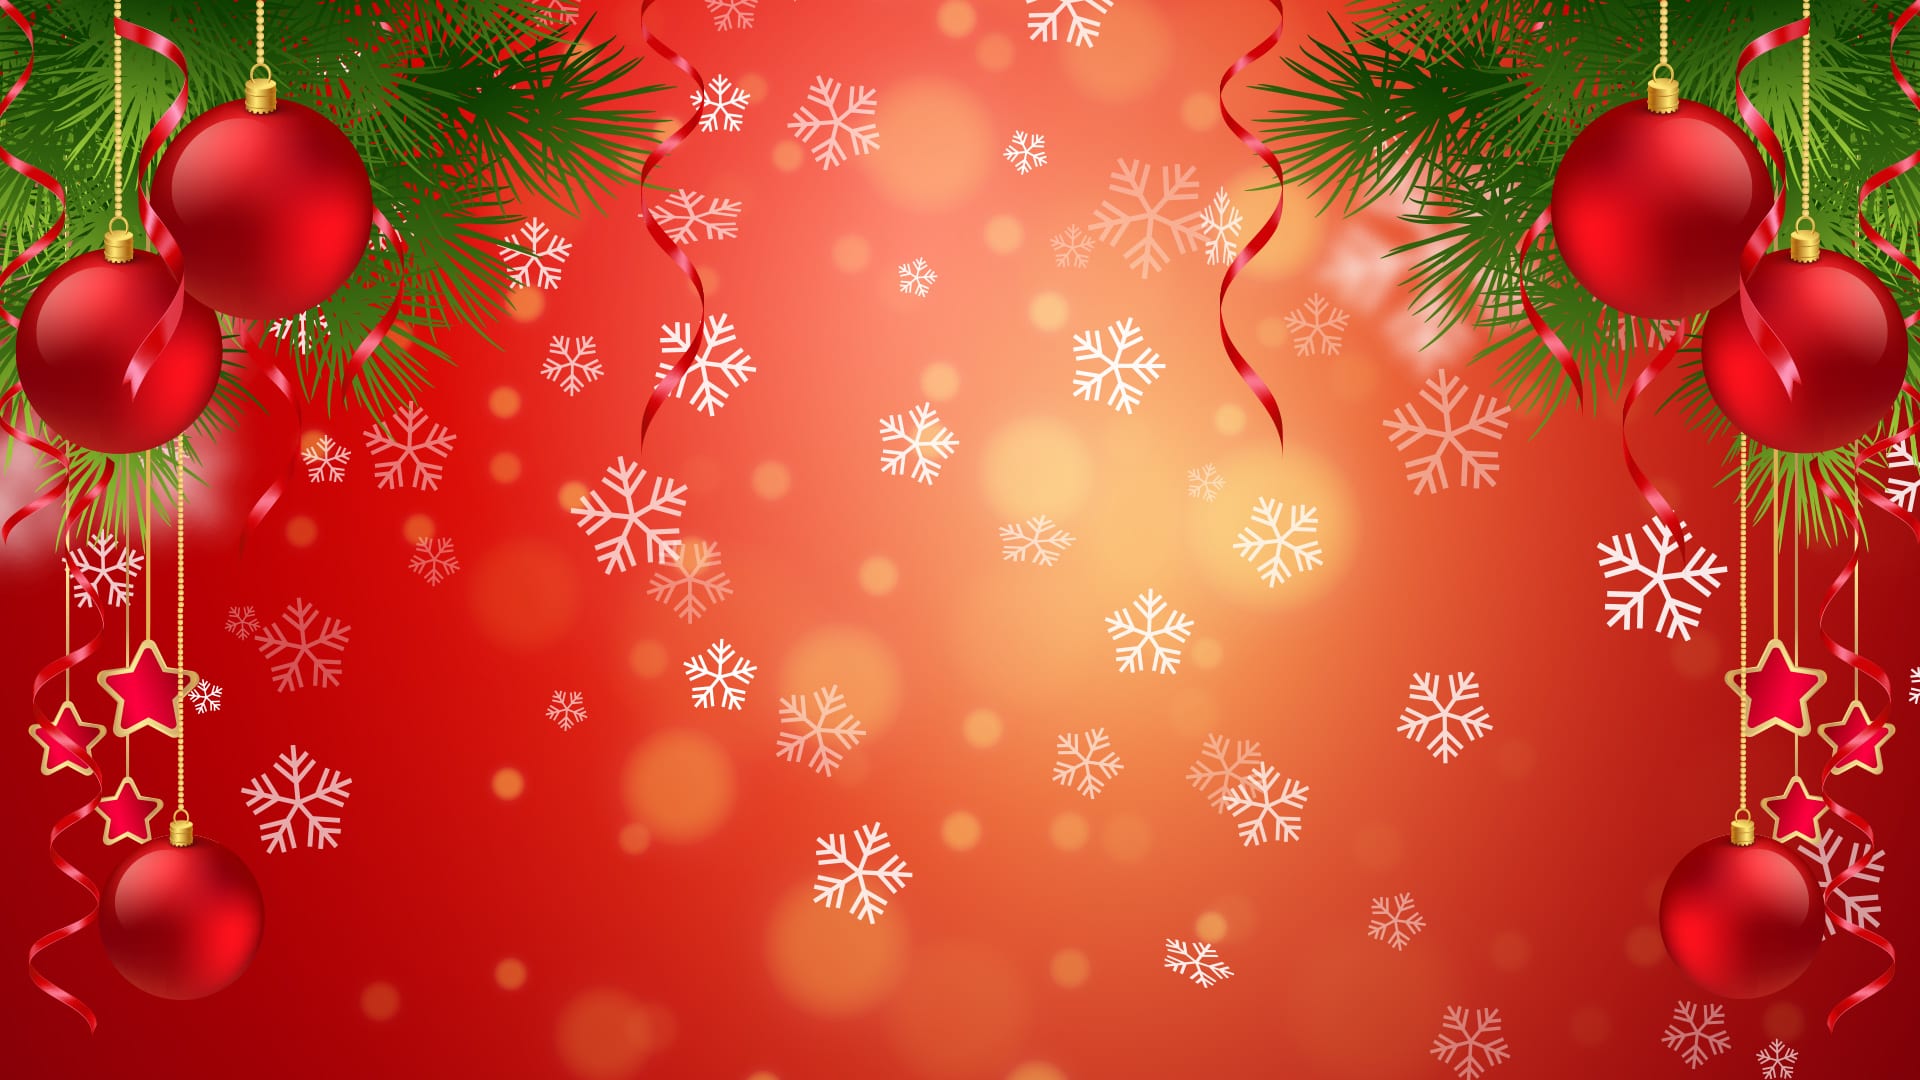 20 Beautiful Christmas Wallpapers And Backgrounds In Full Hd Atulhost